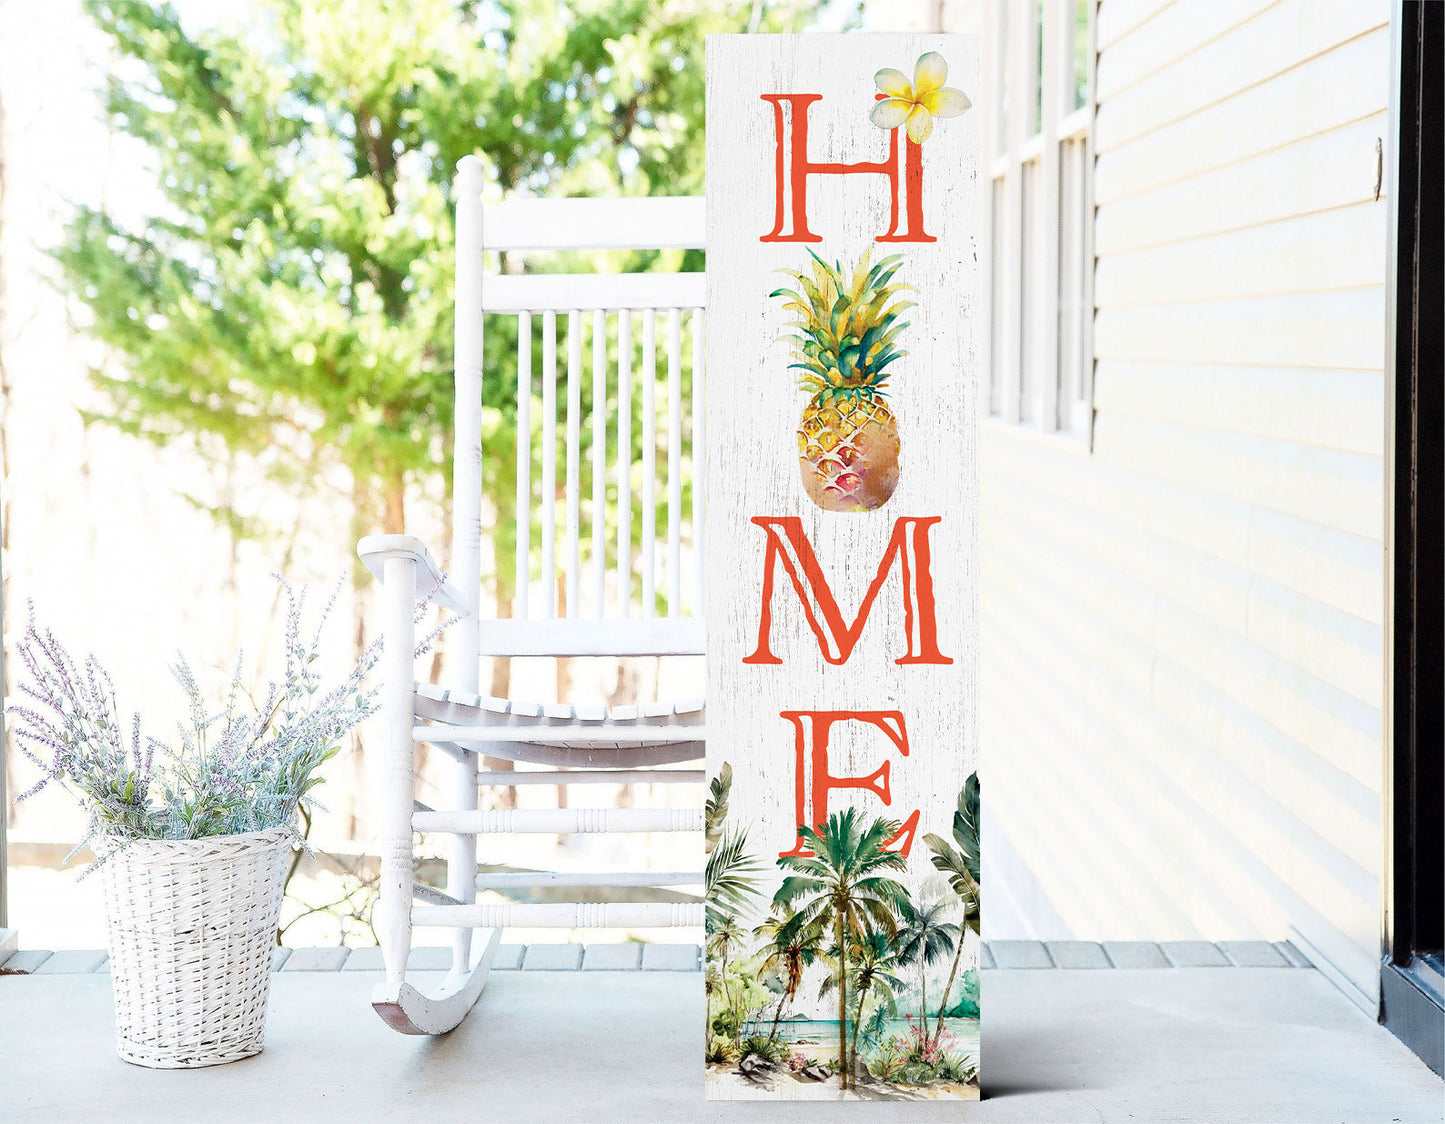 36in Tropical Summer Home Porch Sign for Front Door, Wooden 36-inch Entryway Decor, Vibrant Island-Themed Accent